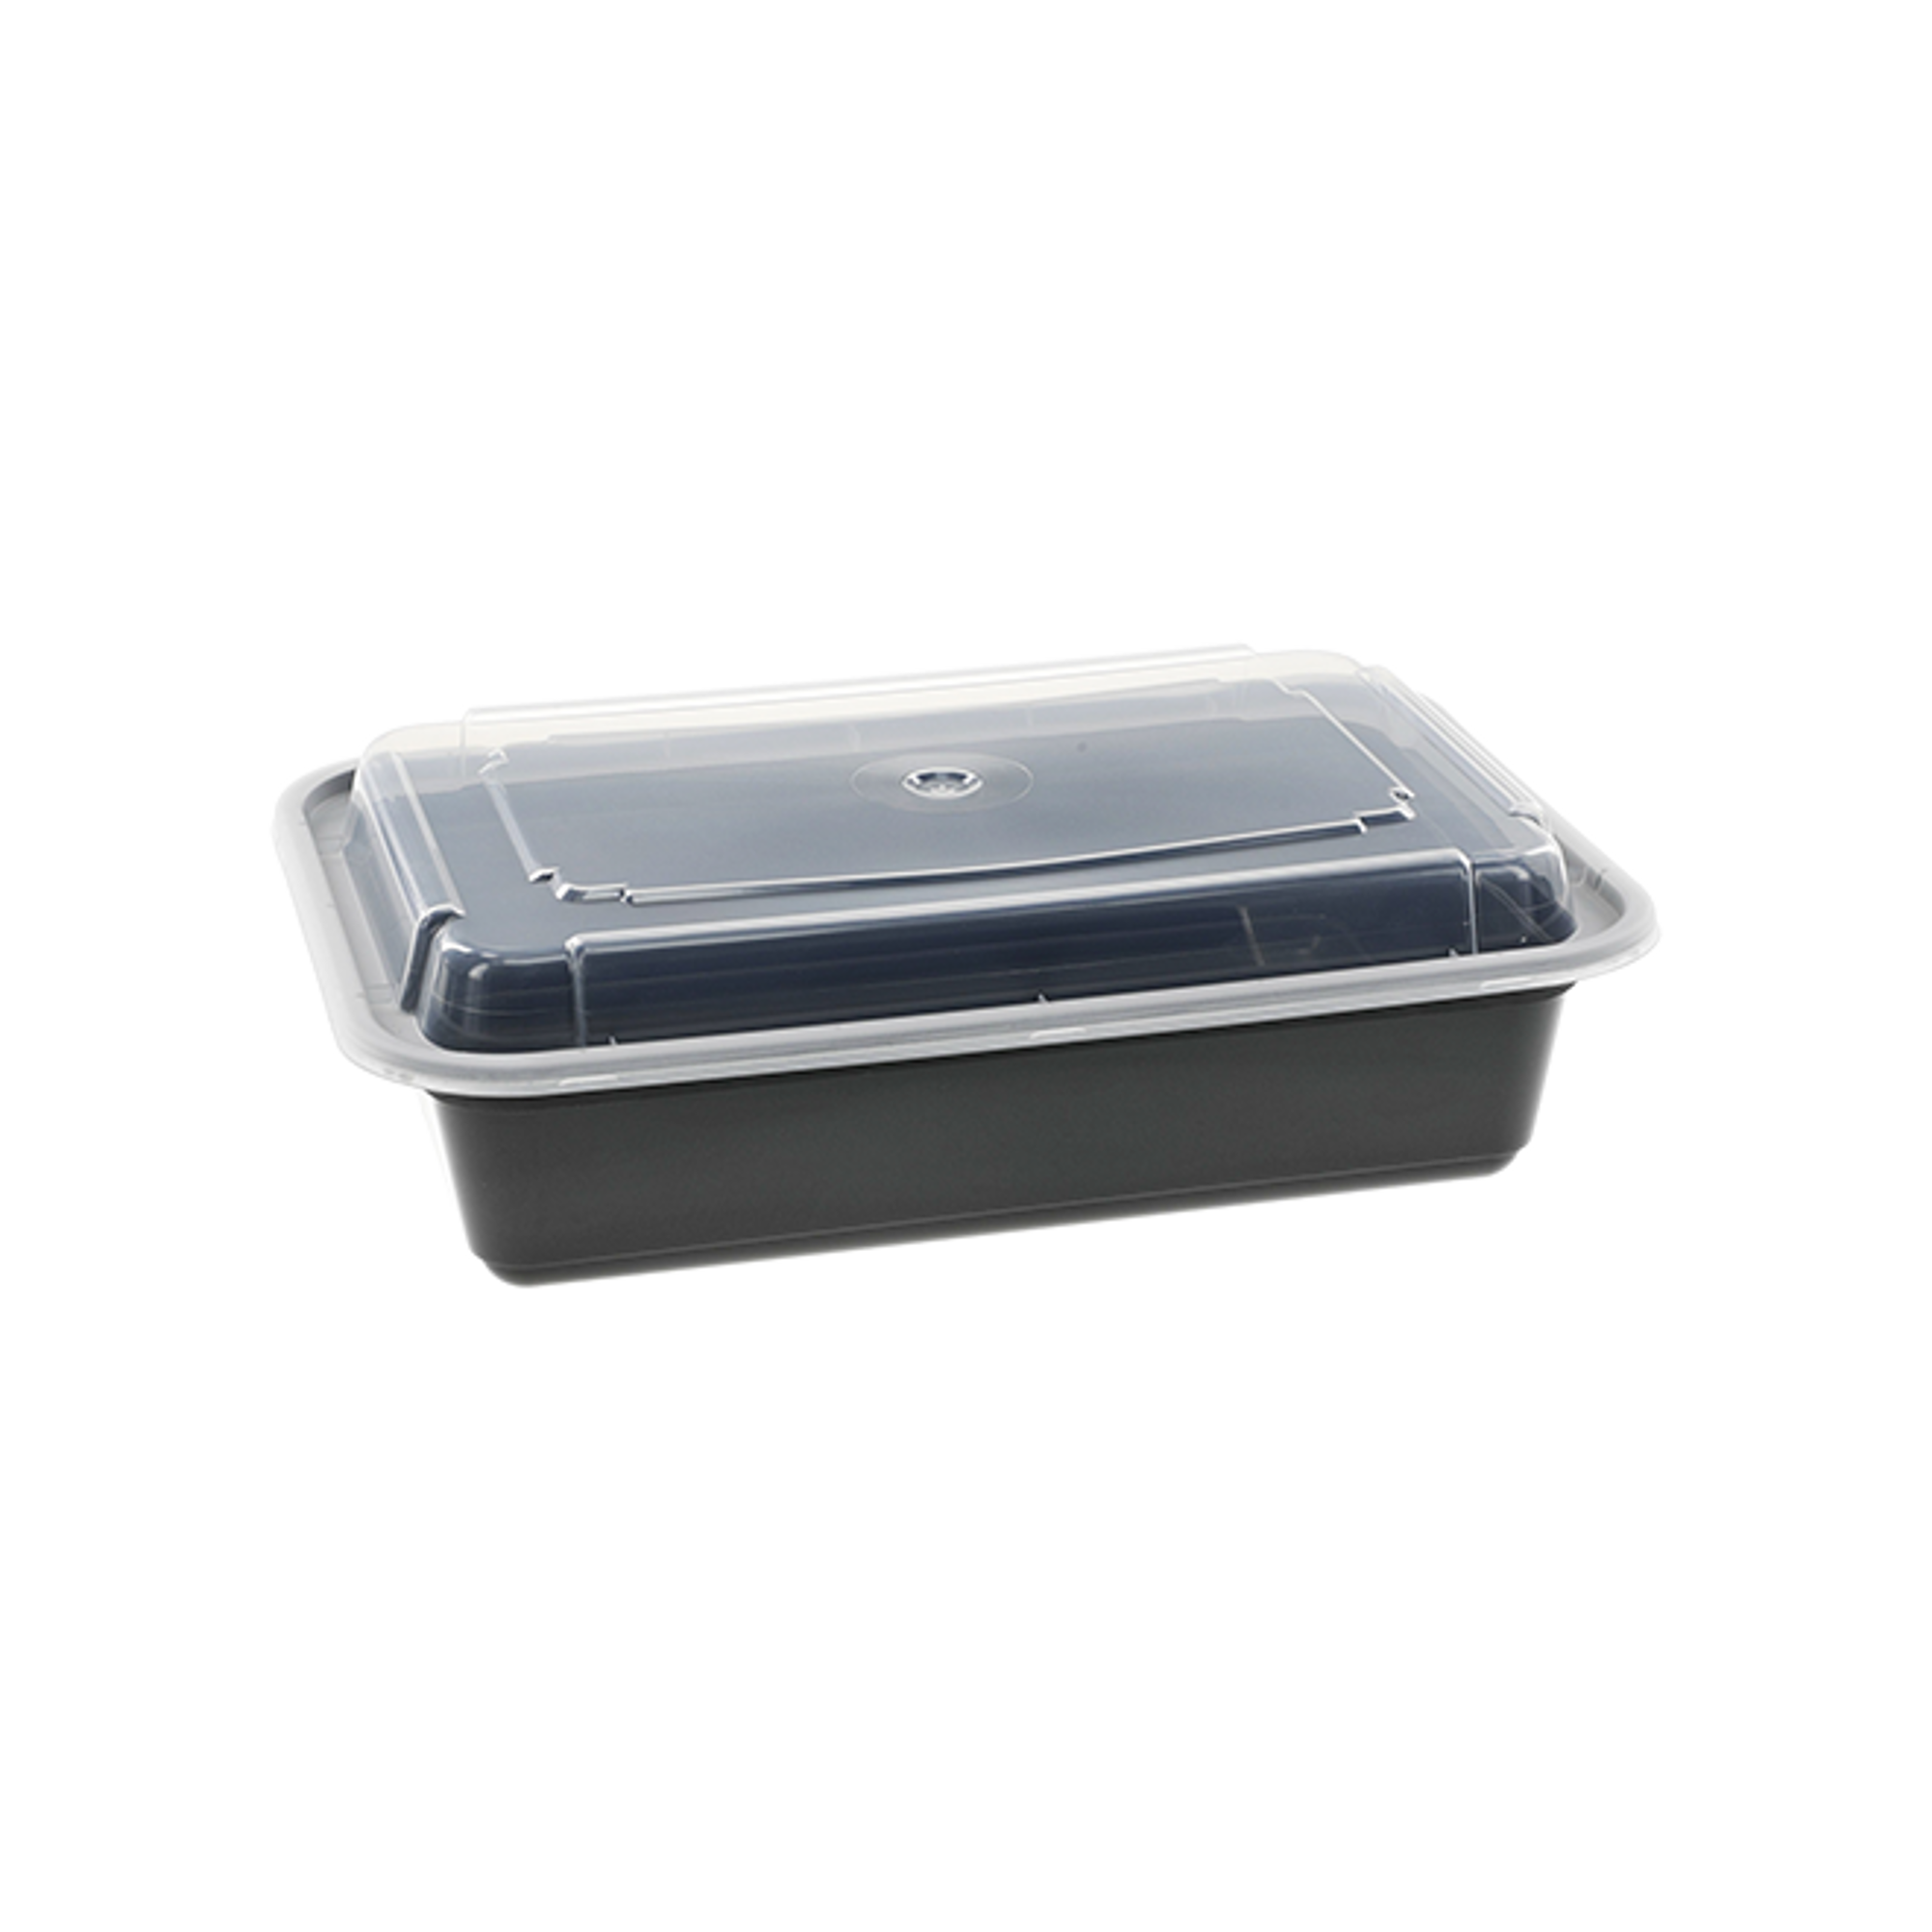 Plastic To-Go Containers And Lids - Rectangle - White With Clear Lid - 38oz.  - 100 Count Box